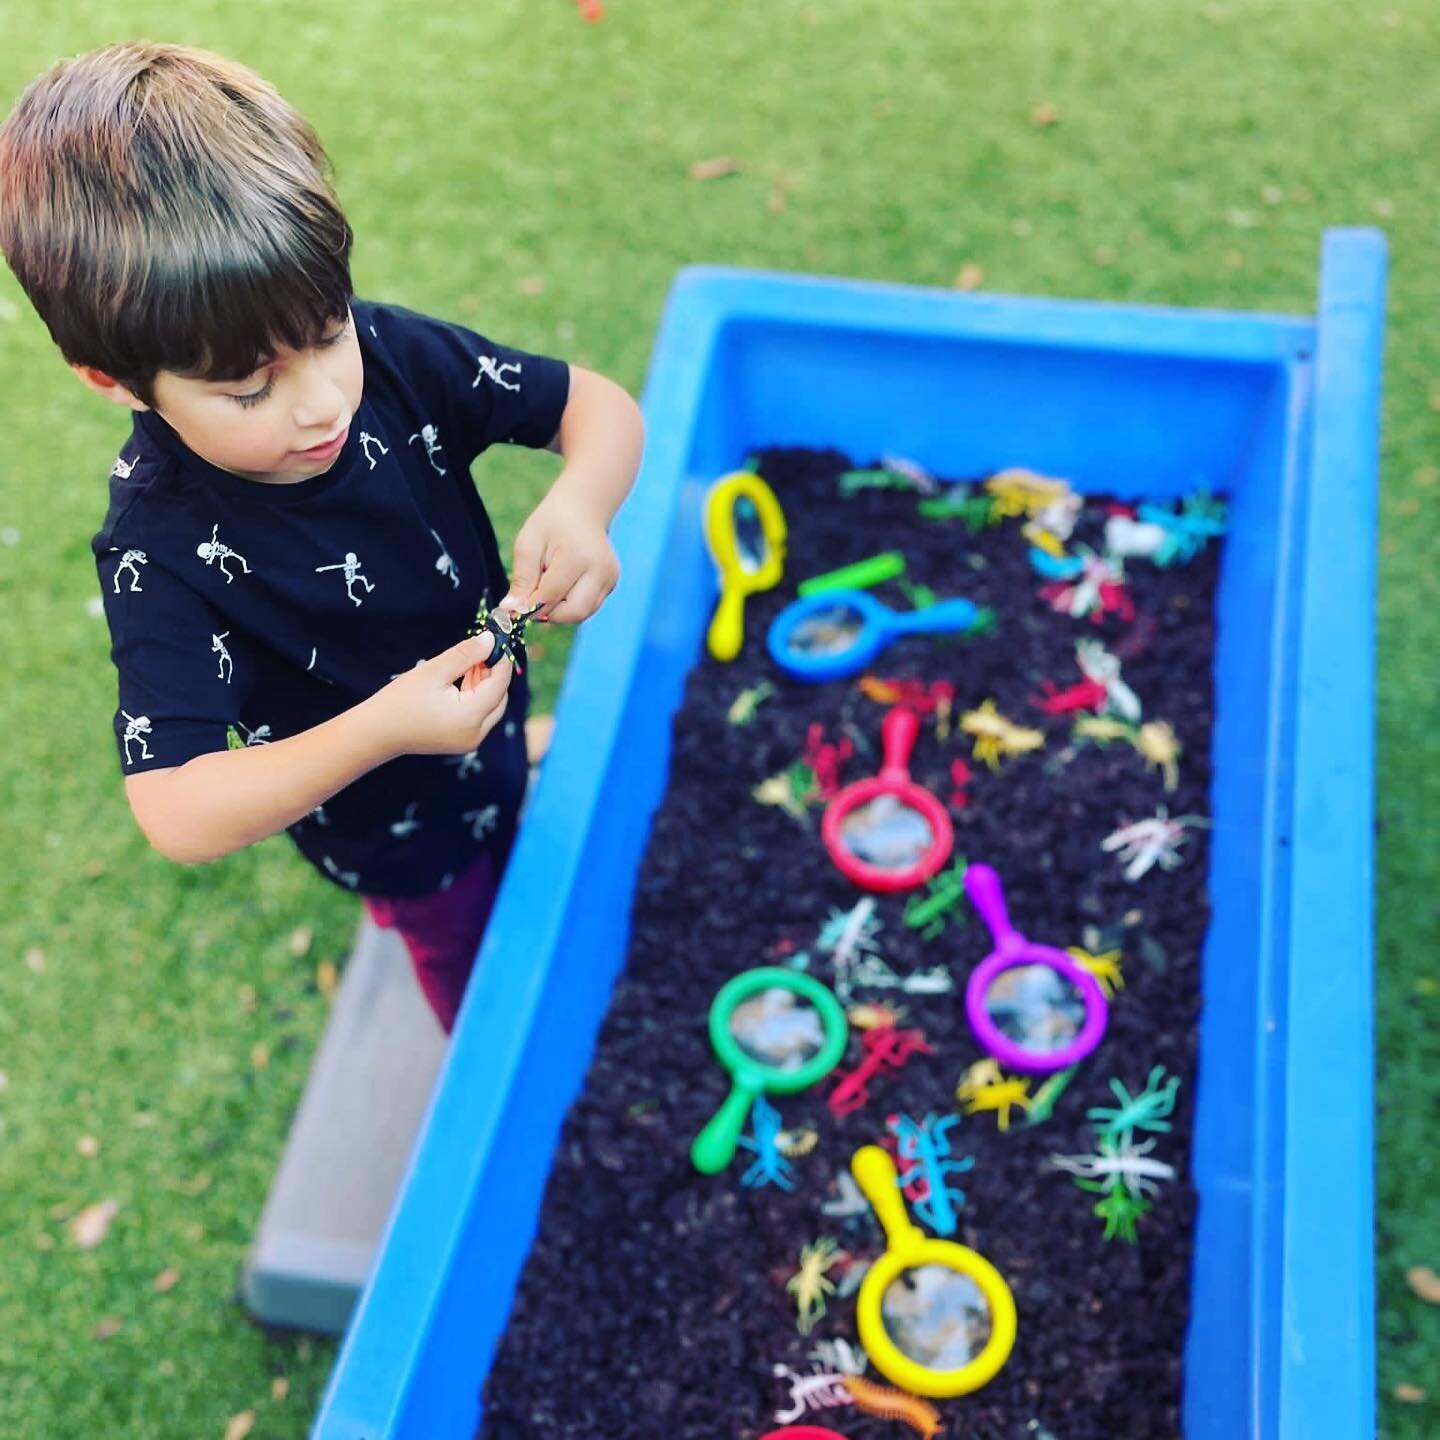 Sensory bins are such a great way for the kids to explore different textures by sight, smell, and touch. We change them every week so that they have a different theme and sensation. The kids love it! 

#playbasedlearning #playbasedpreschool #socialem